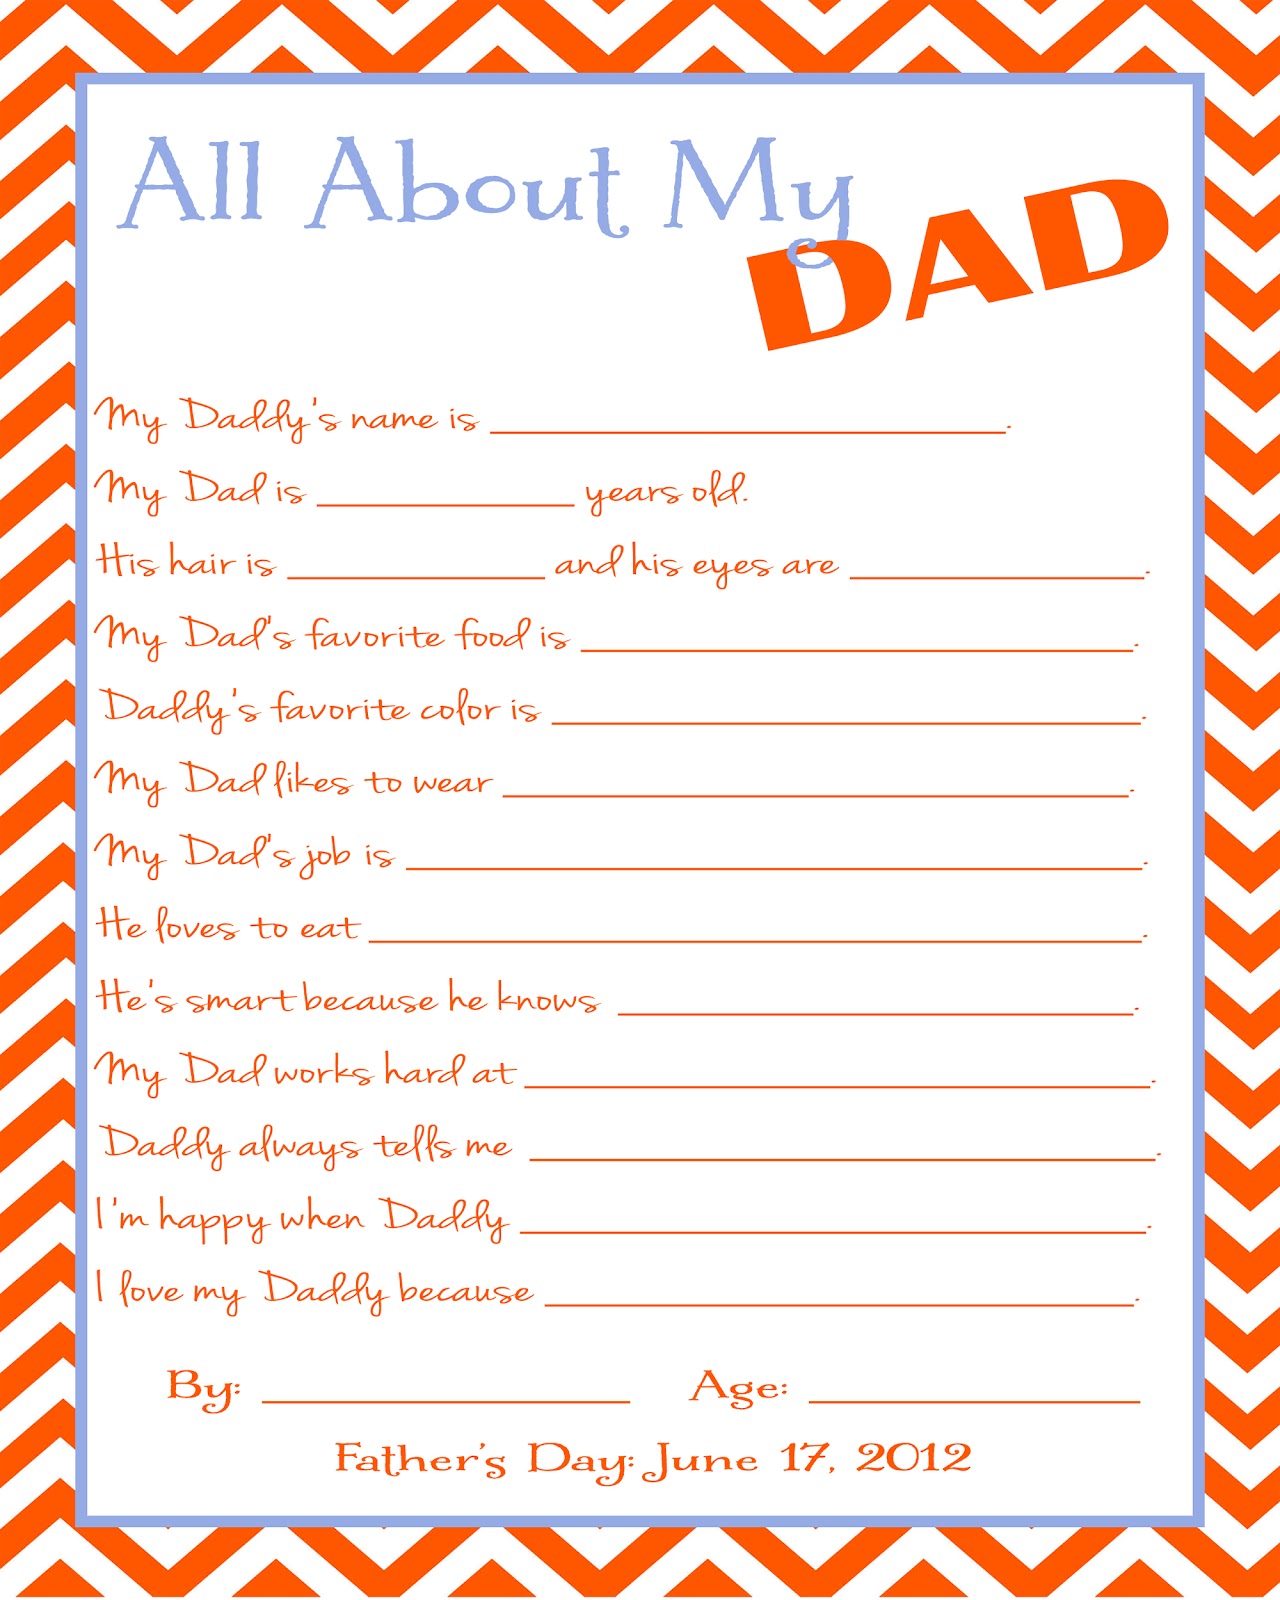 Simply Mommies: A few more Fun Father's Day Ideas